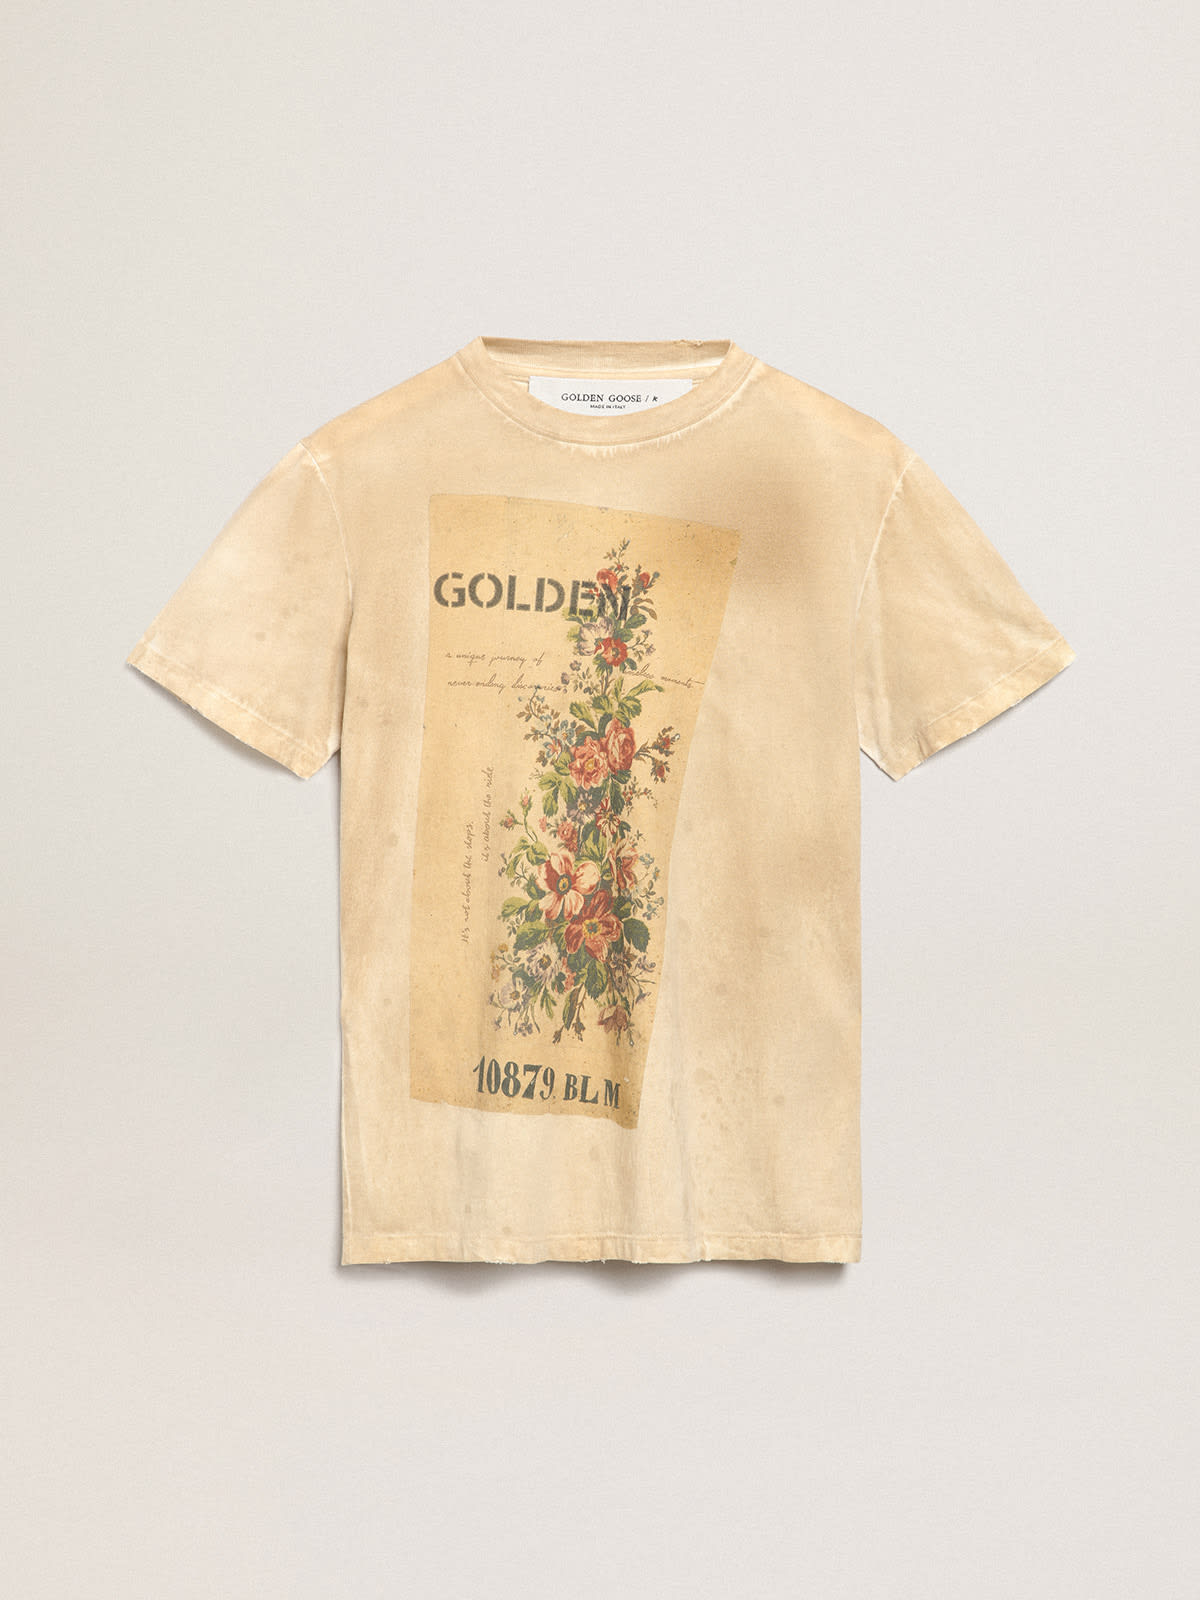 Golden Goose - Women's bone white T-shirt with floral print in 